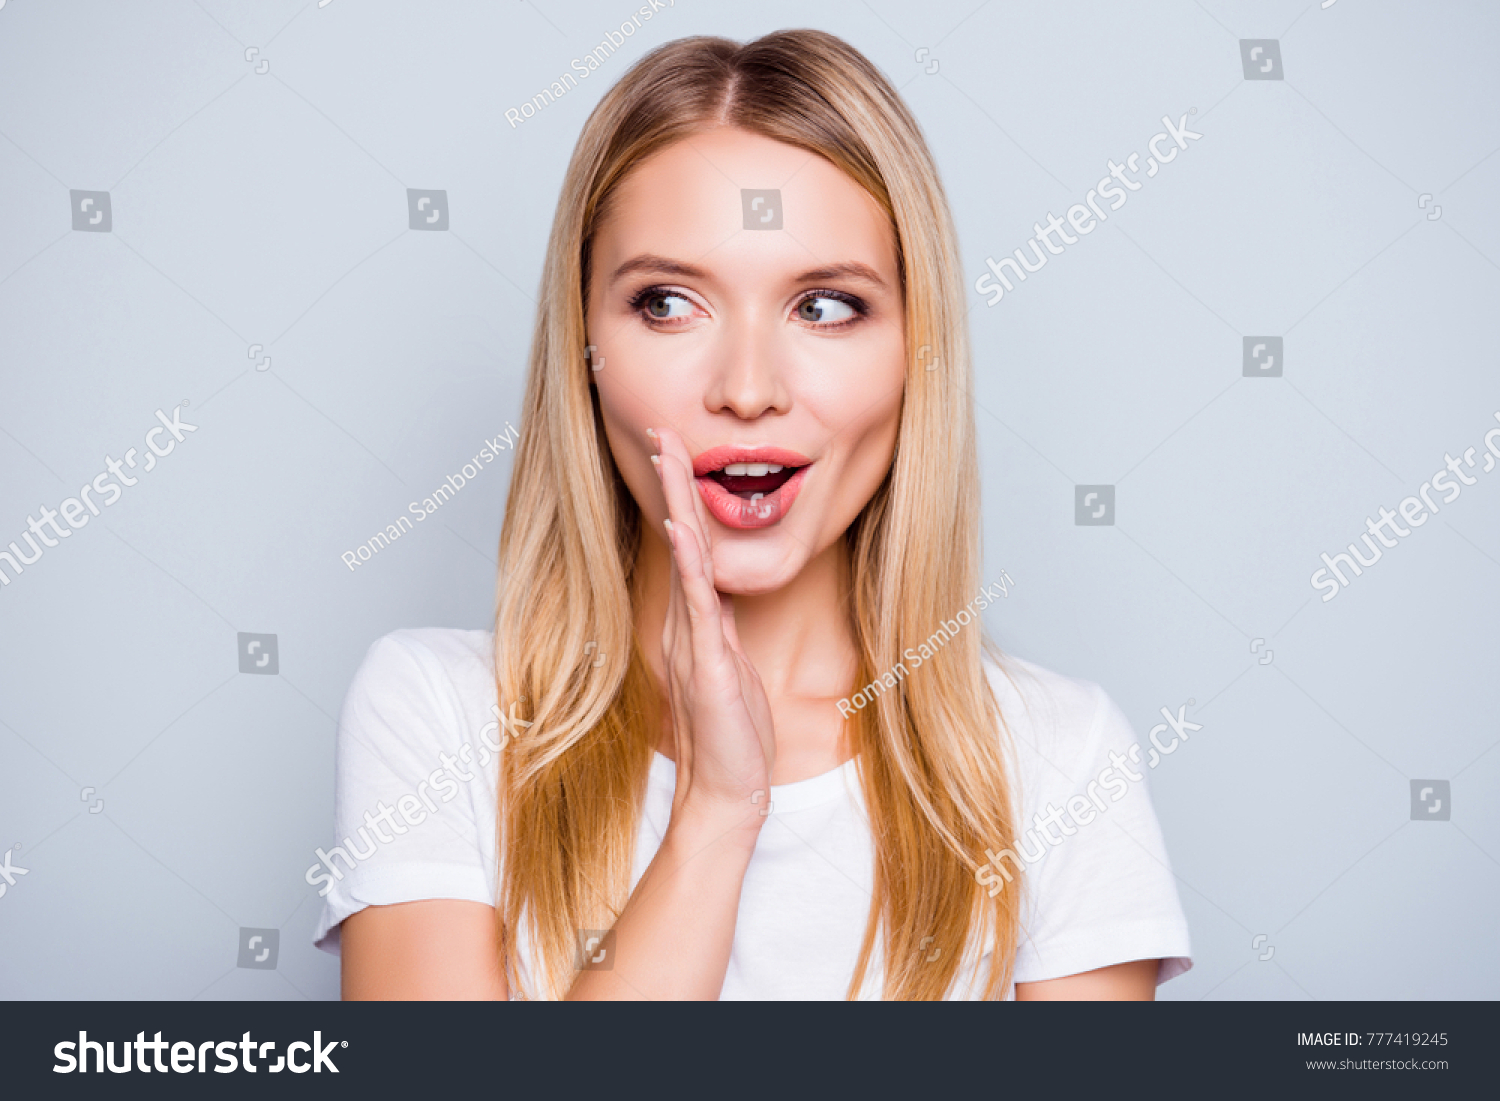 Don't tell anyone! Talkative mysterious pretty beautiful woman with blonde hair dressed in white tshirt is saying secret hot braking news and looking aside, isolated on grey background #777419245